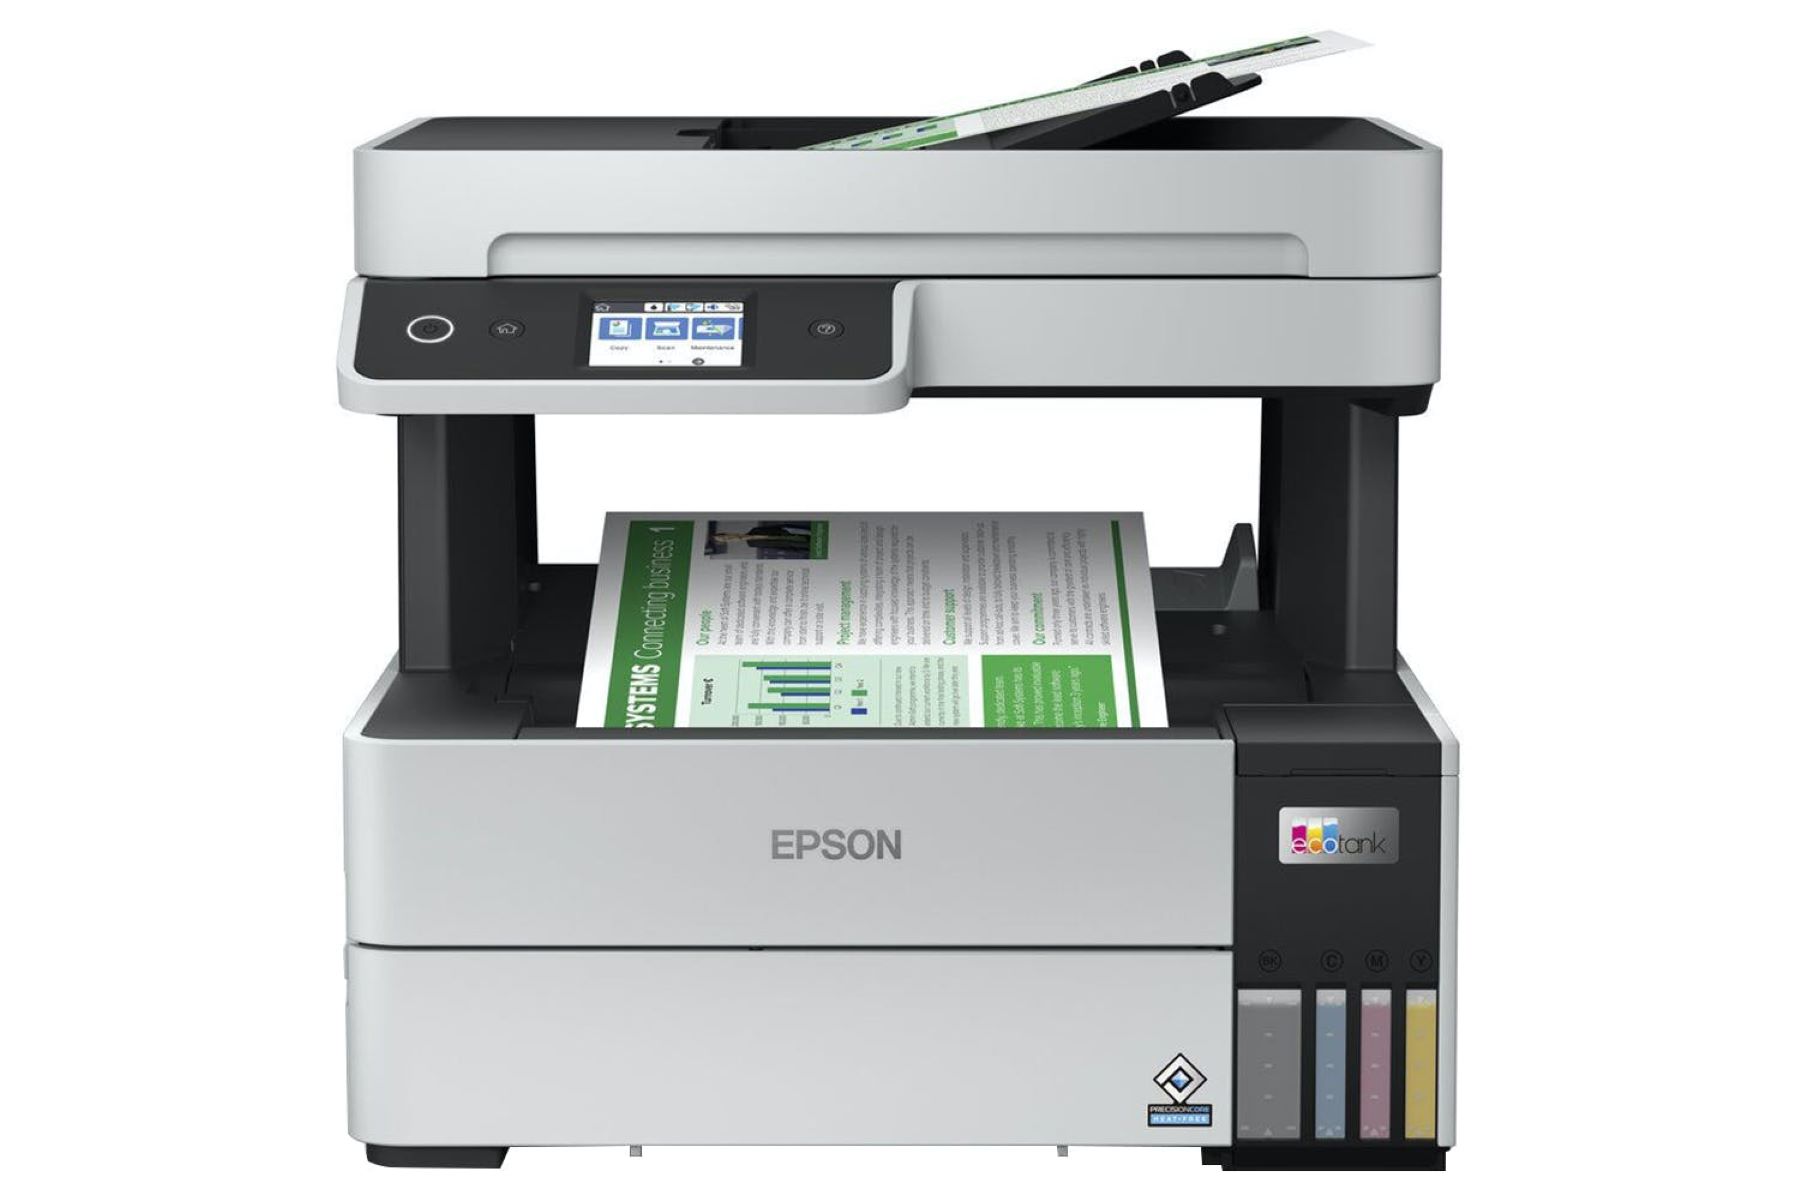 How To Set Up Scan To Email On Epson Printer